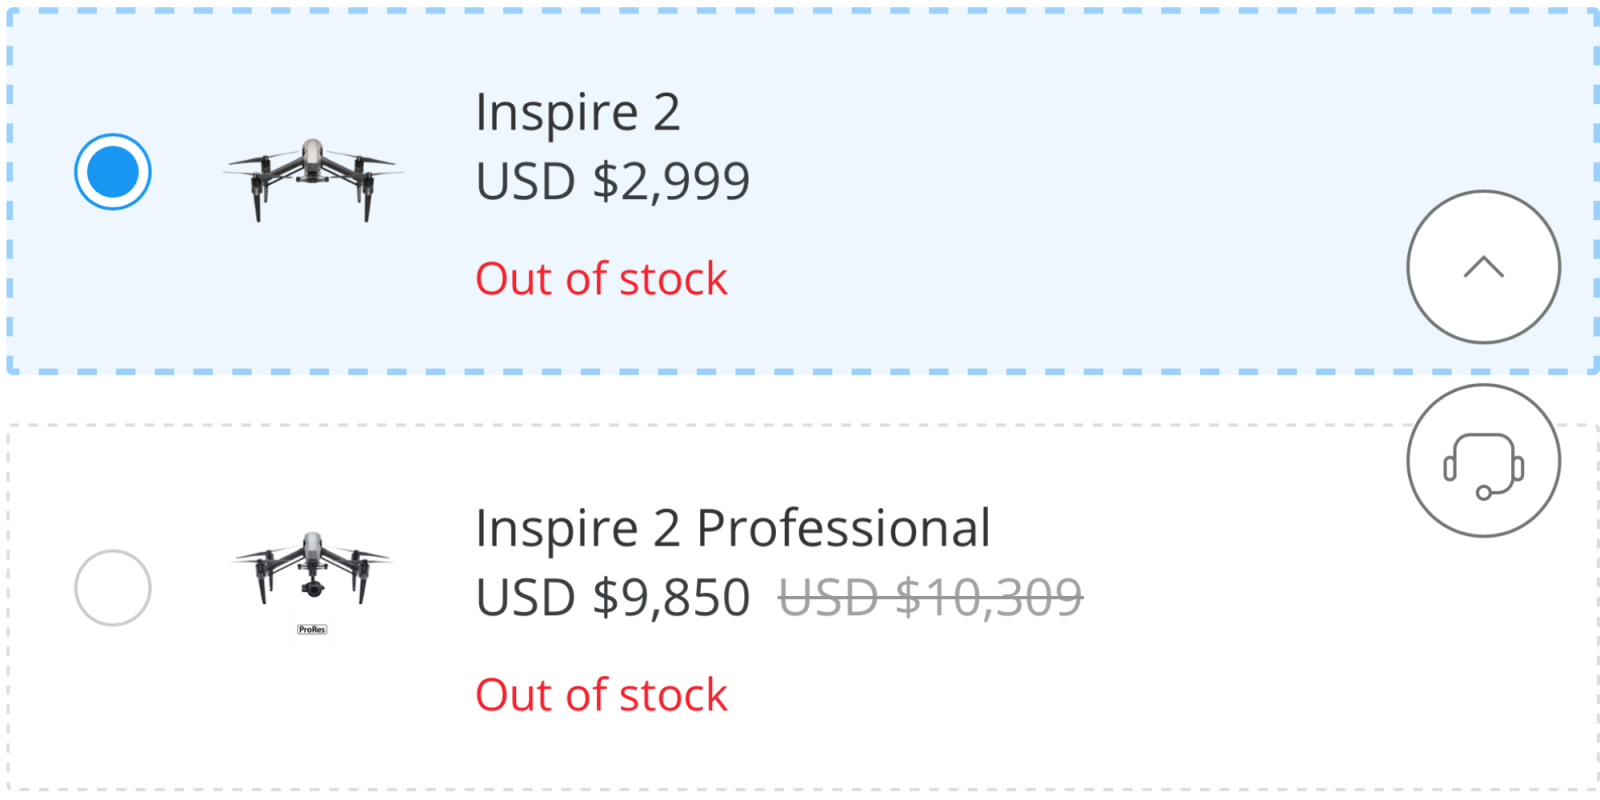 Inspire 2 Out of Stock